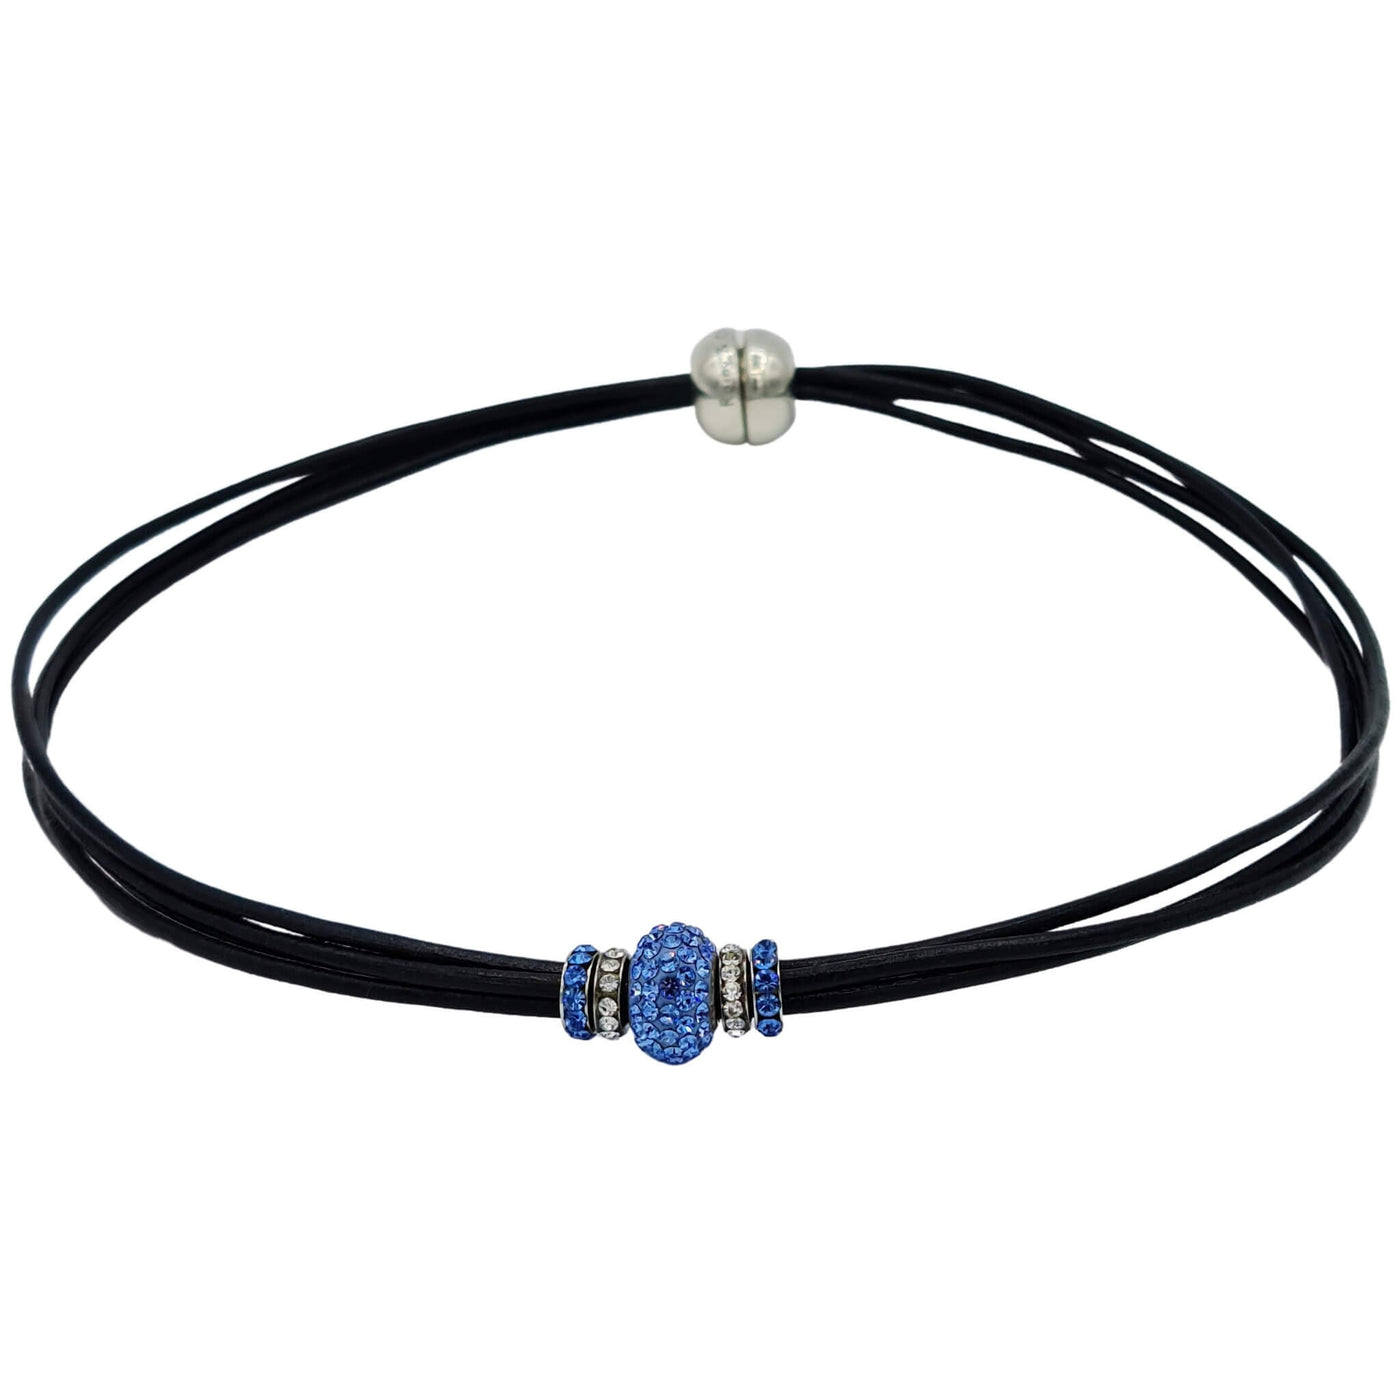 Set of bracelet and choker necklace with silver fine crystal in sky blue  and strass rondelles – 